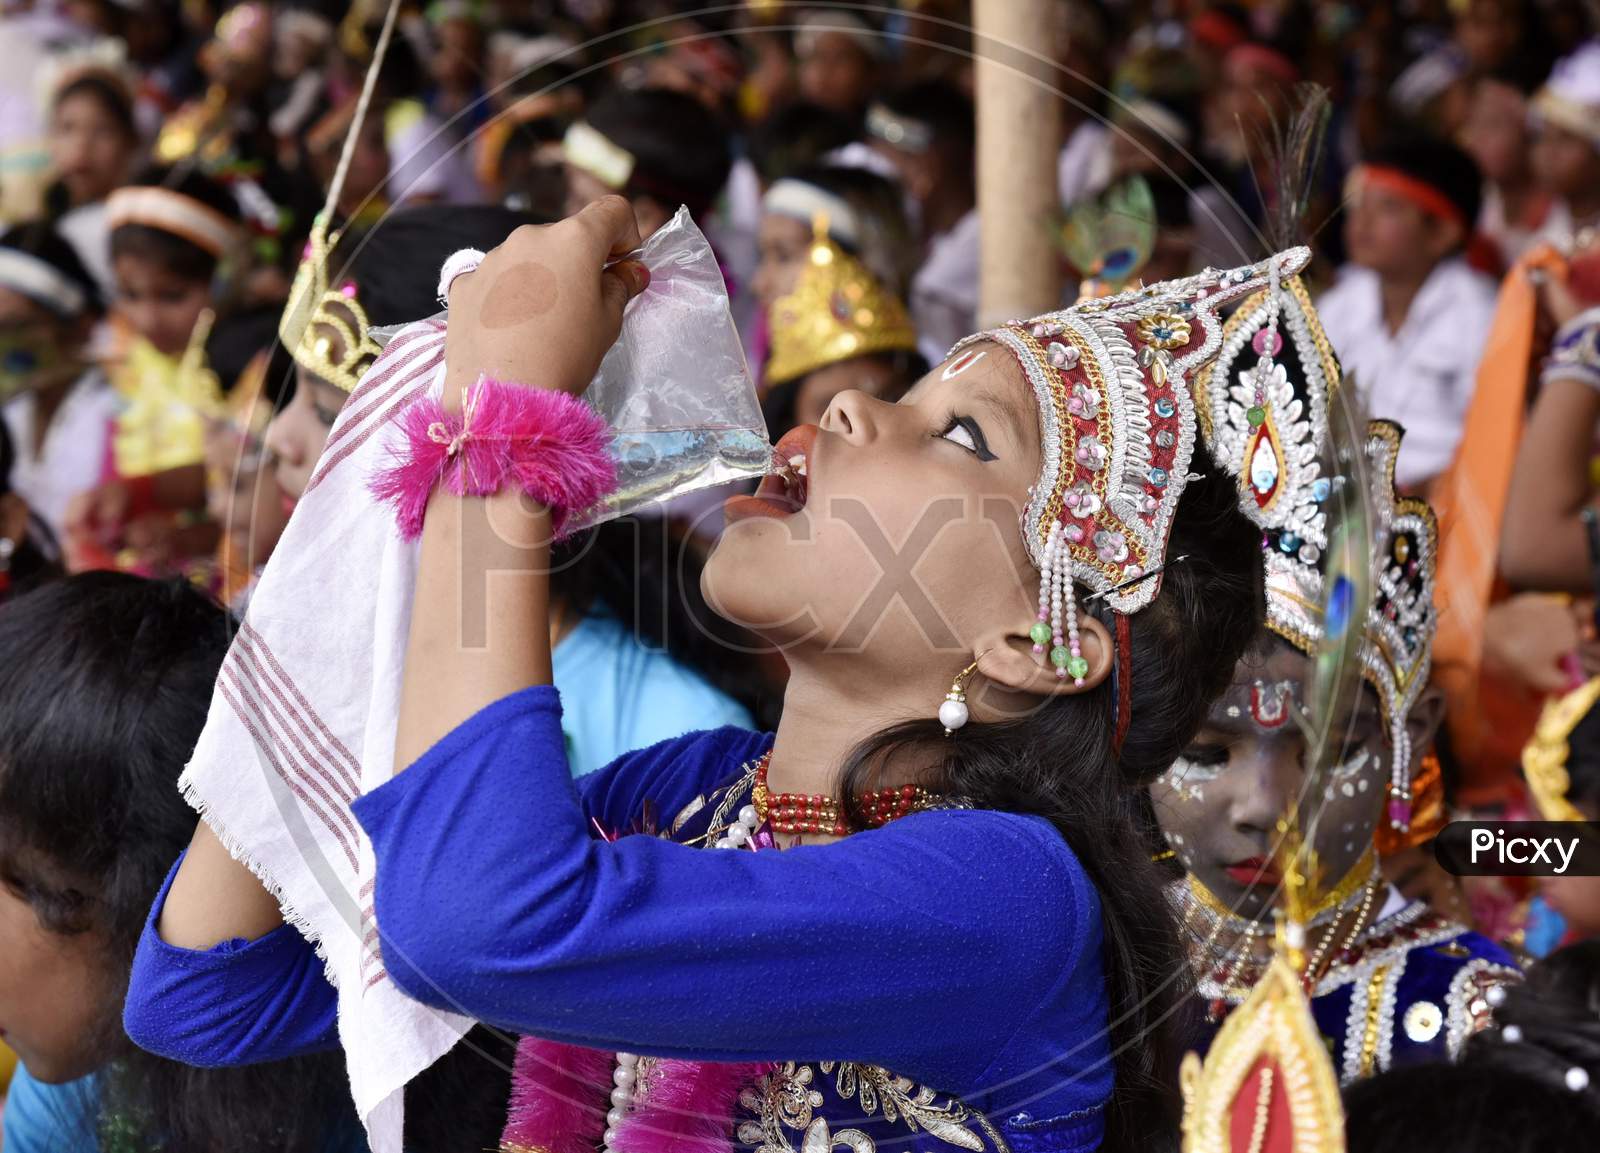 Little Children Dressed Up As Lord Krishna Drinking Water To Beat The Heat During The Janmashtami Festival In Morigaon, Assam, India